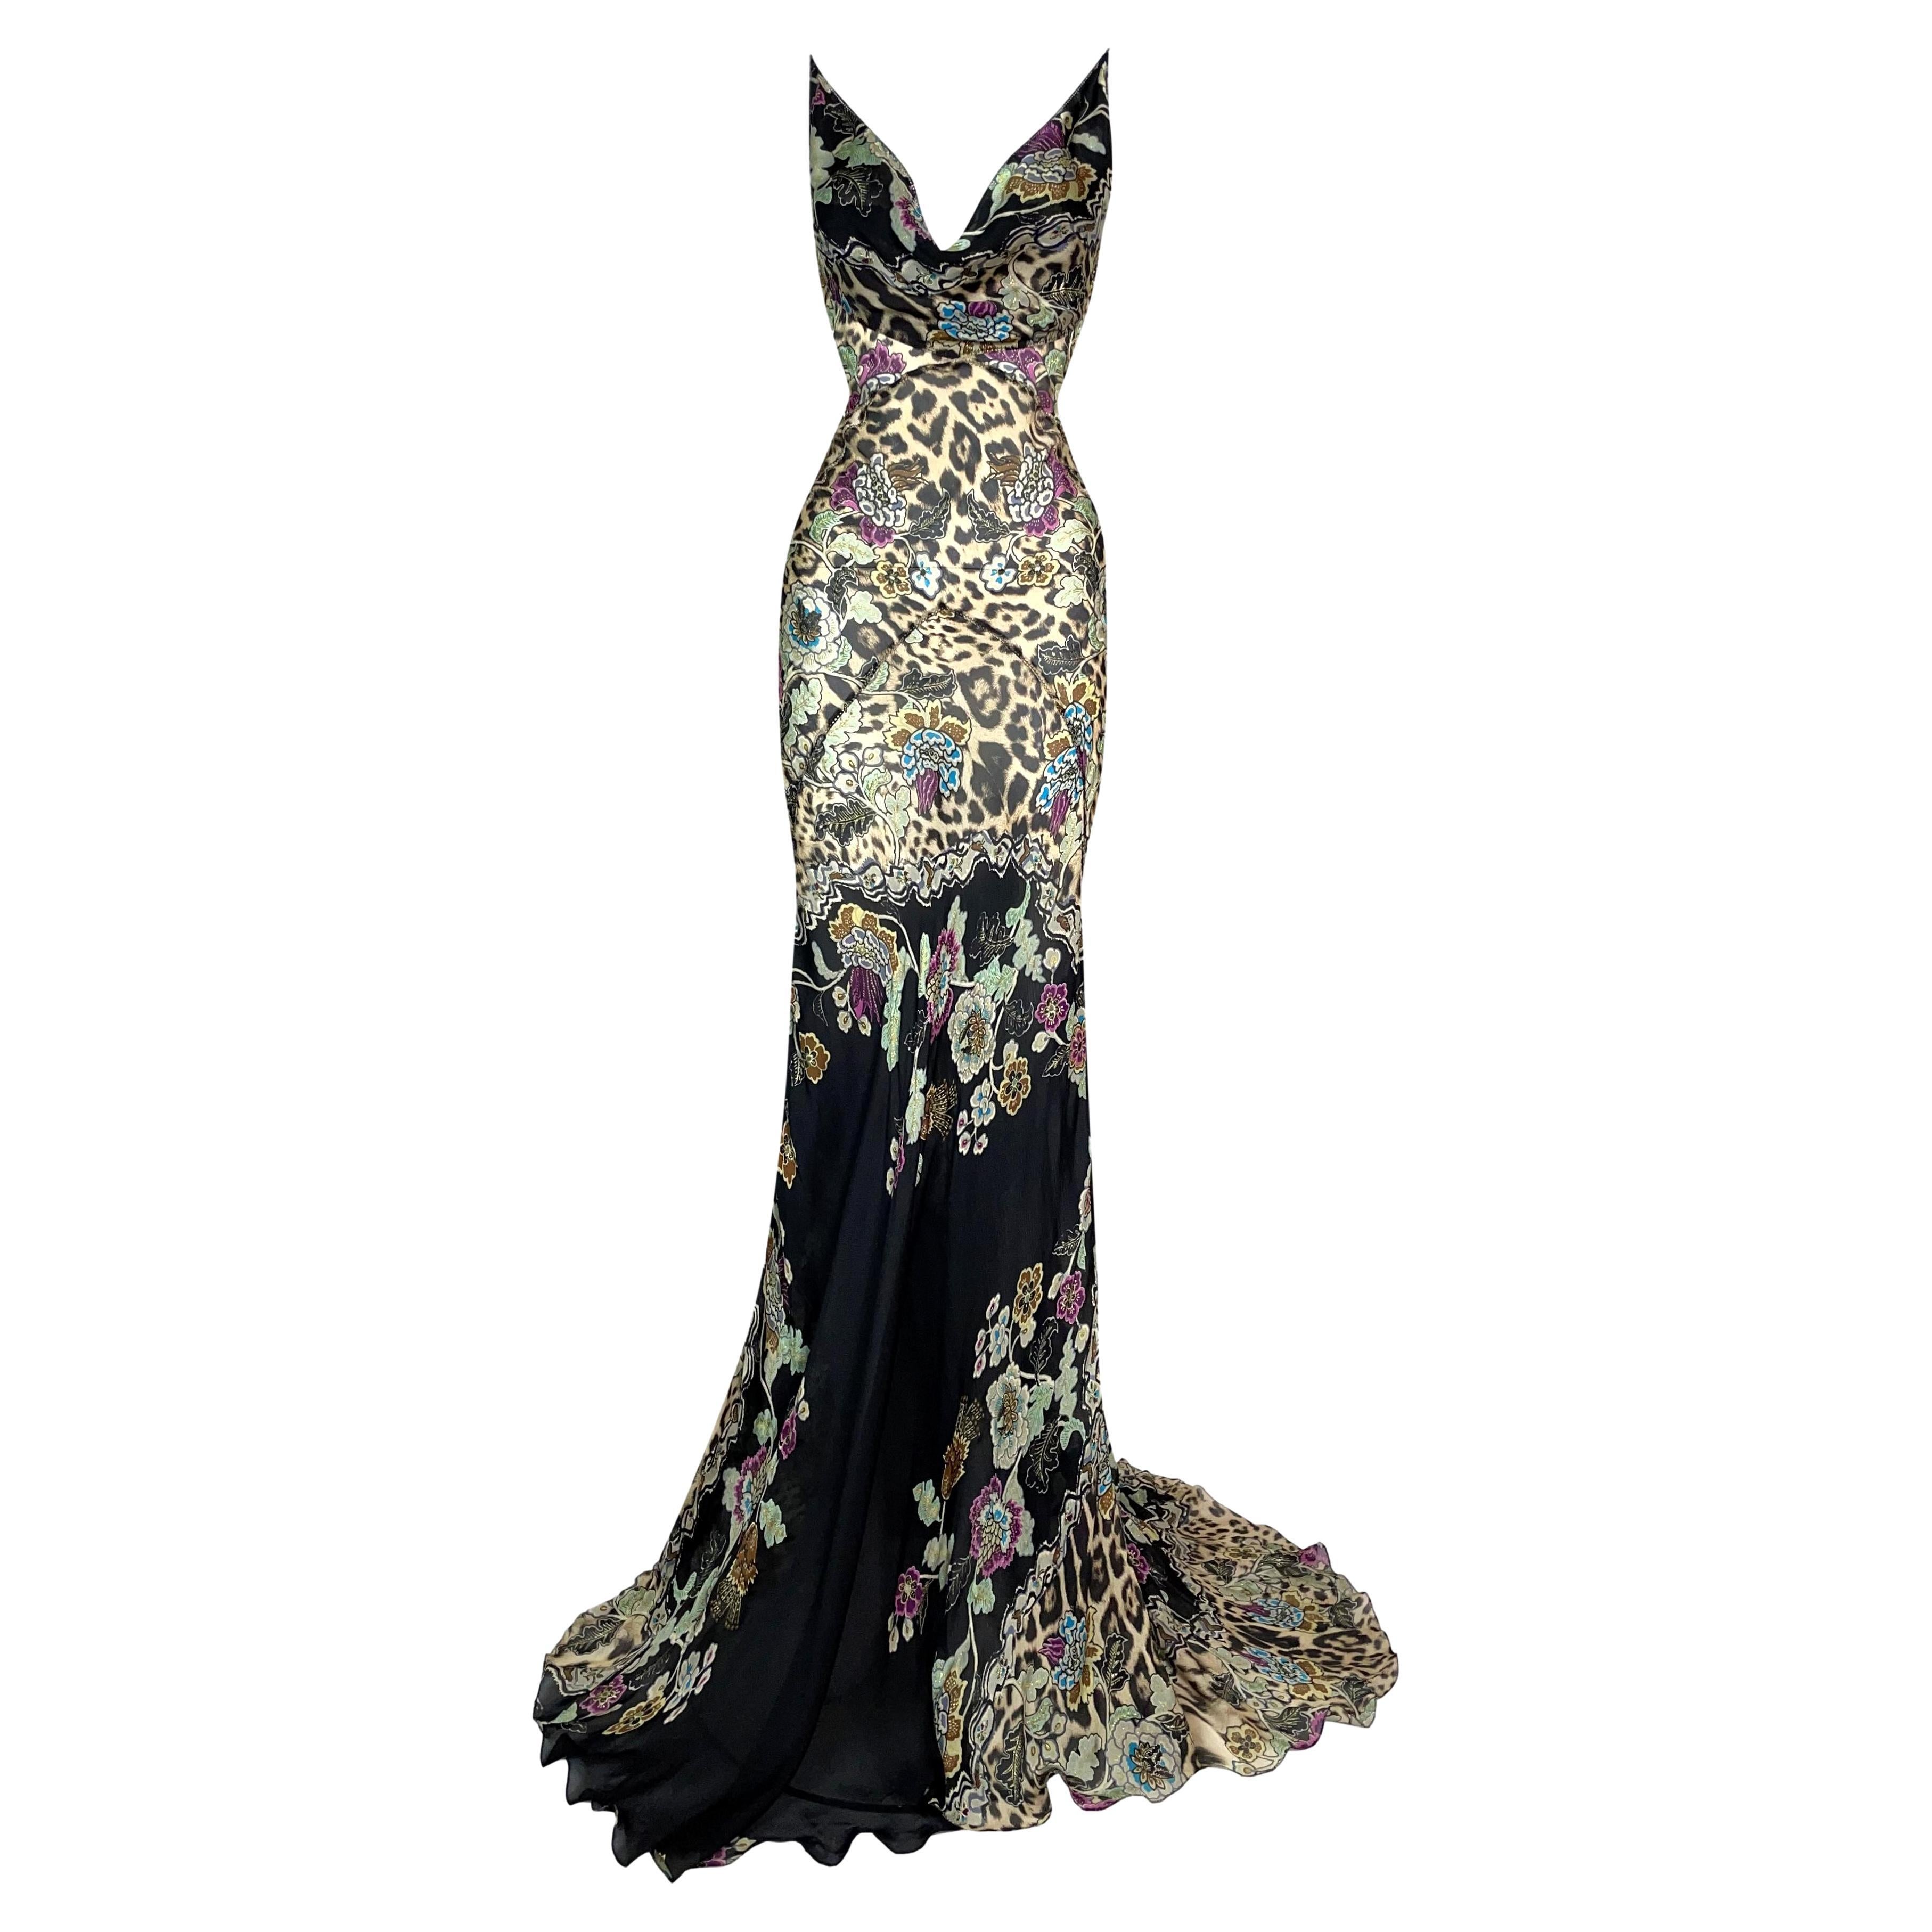 S/S 2003 Roberto Cavalli Chinoiserie Black Silk Extra Long Gown Dress For Sale